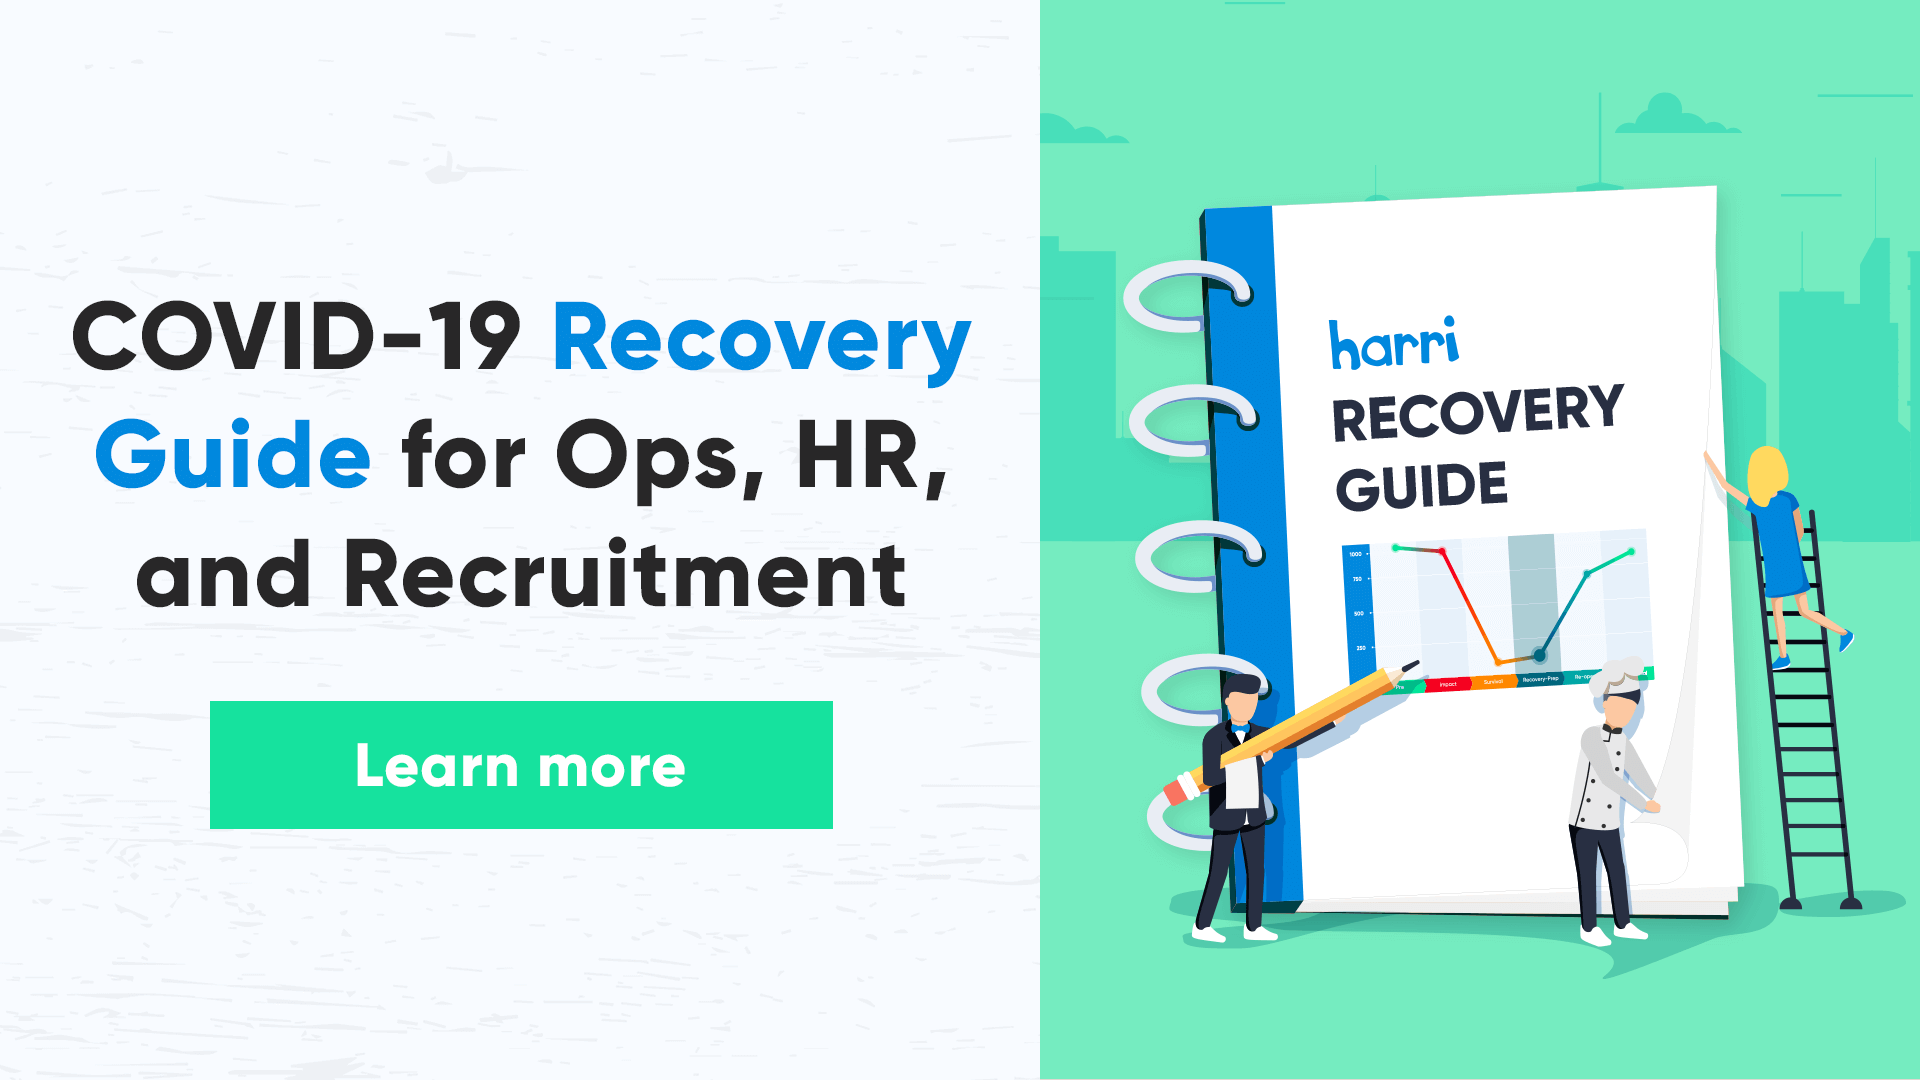 COVID-19 Recovery Guide for Ops, HR, and Recruitment